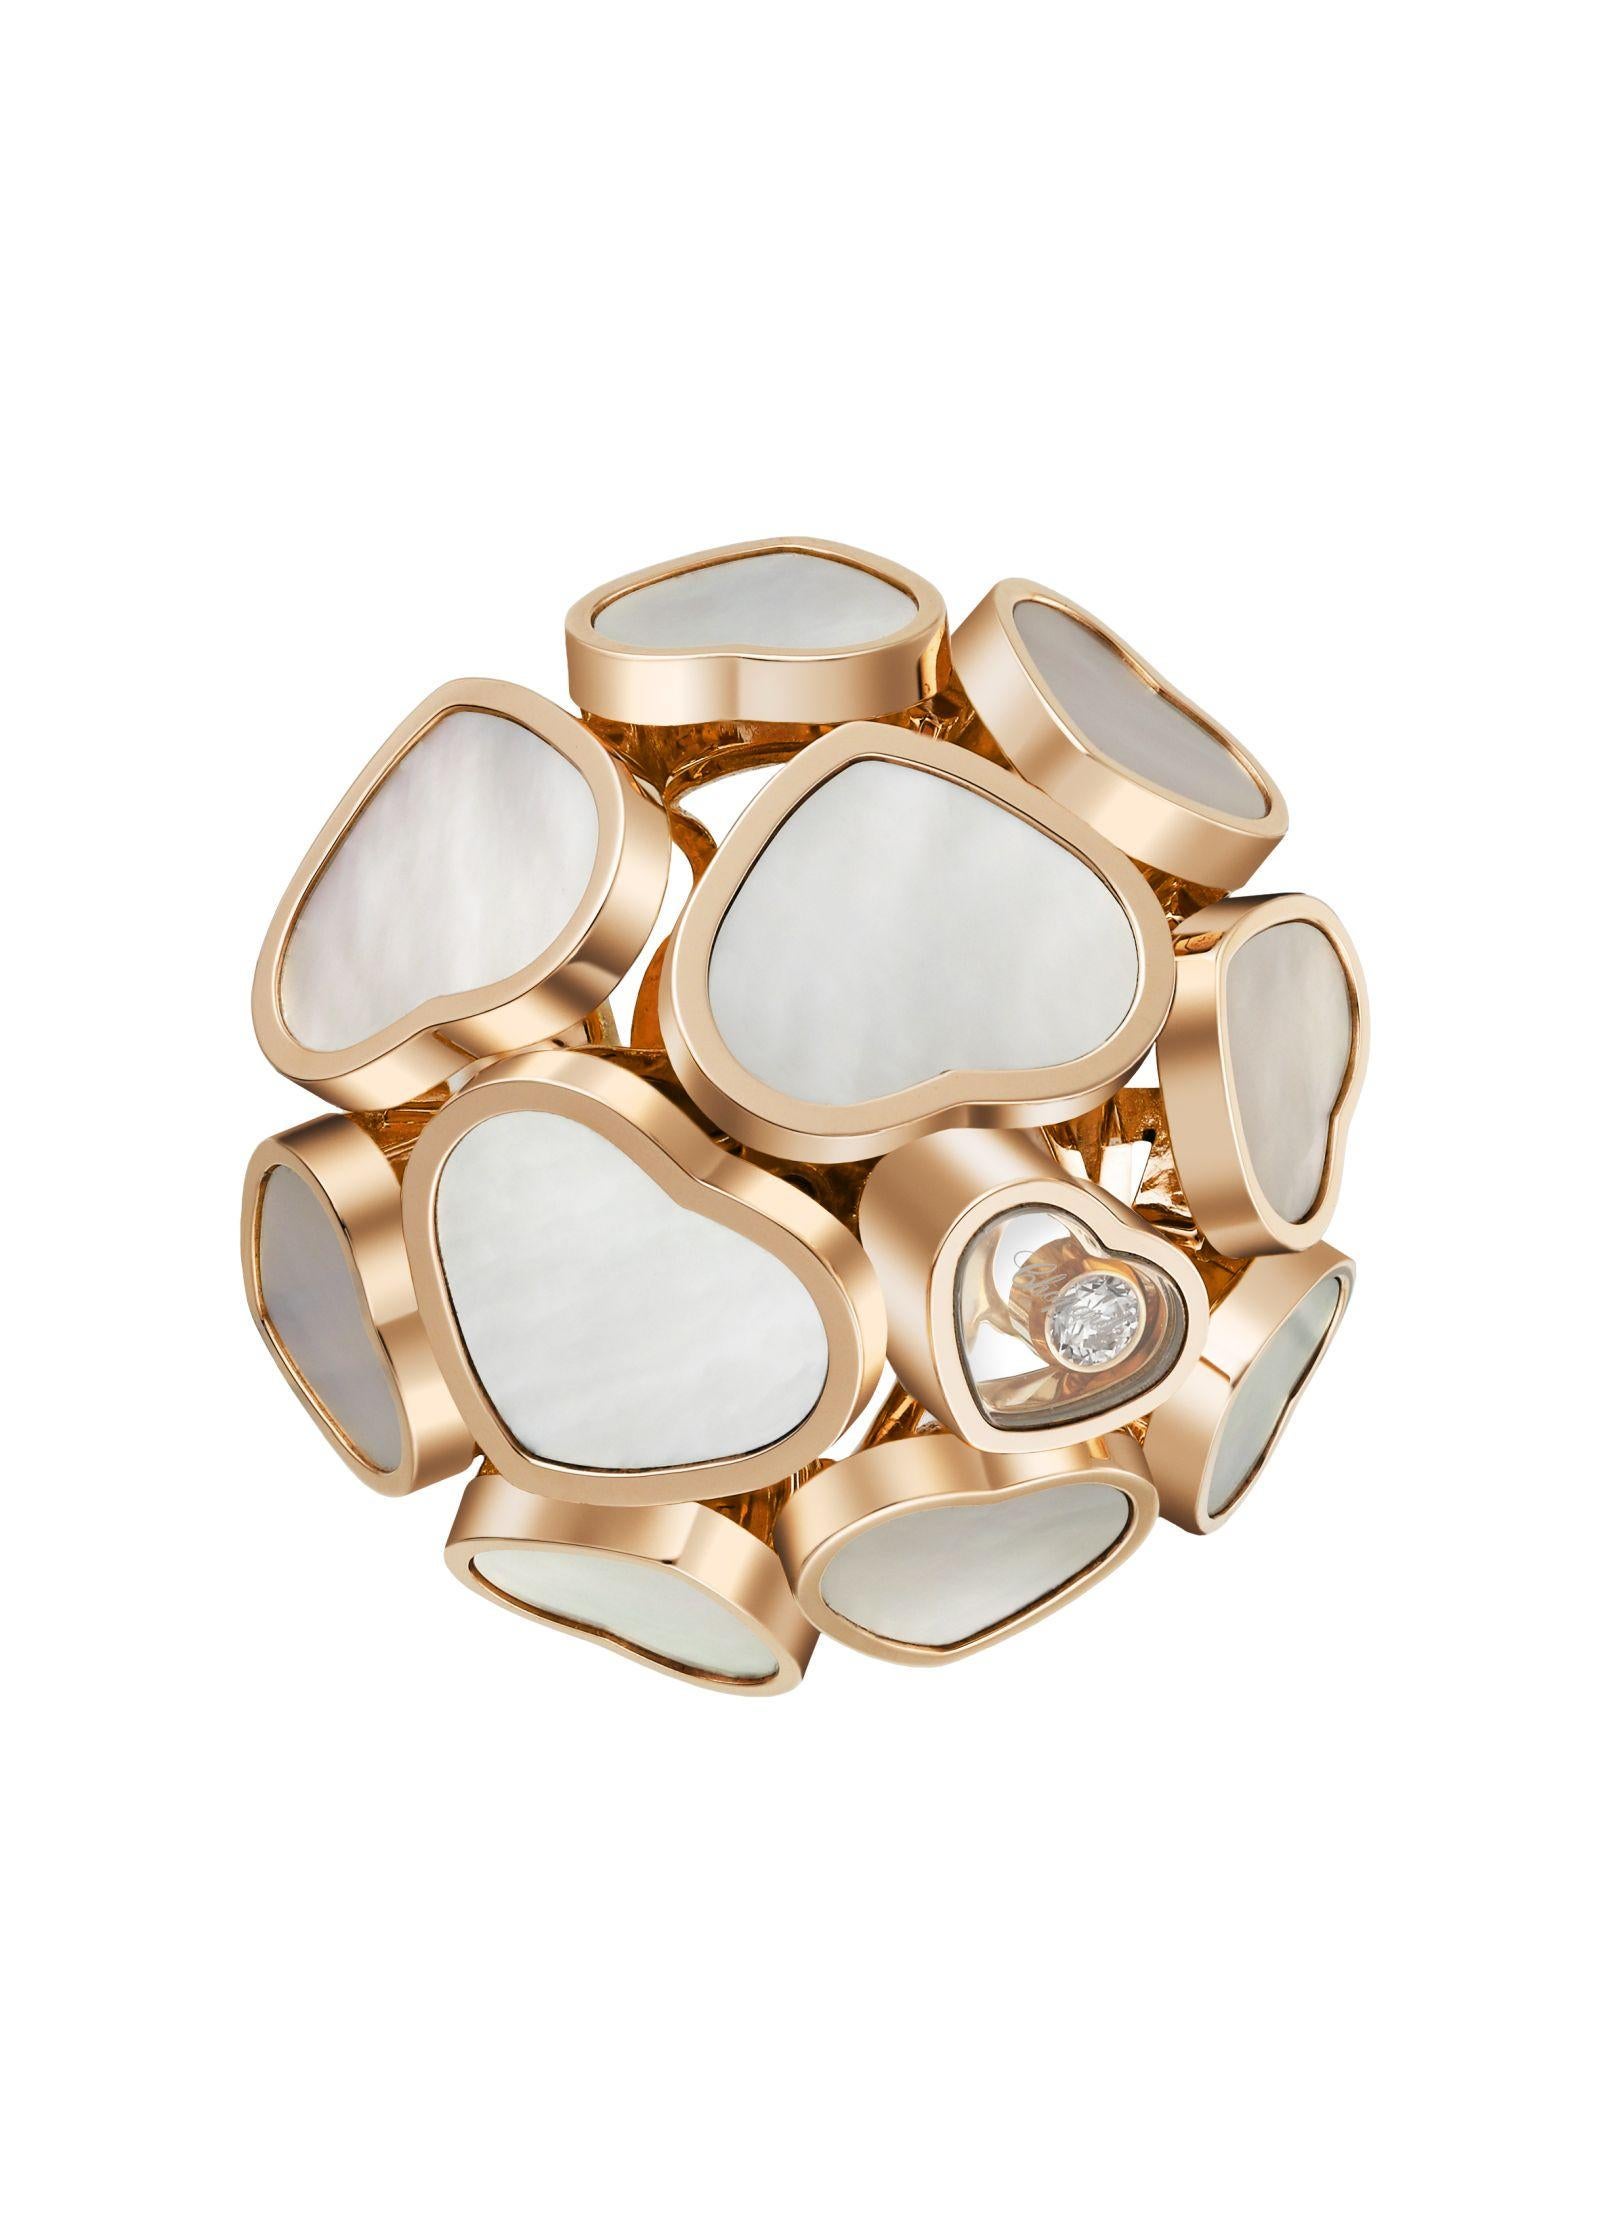 A profusion of Happy Hearts grace this ring in 18-carat rose gold making an elegant, fun and creative addition to the Happy Diamonds collection. Hearts cluster with joyful abandon on the finger, inlaid with mother-of-pearl and variously sized, all